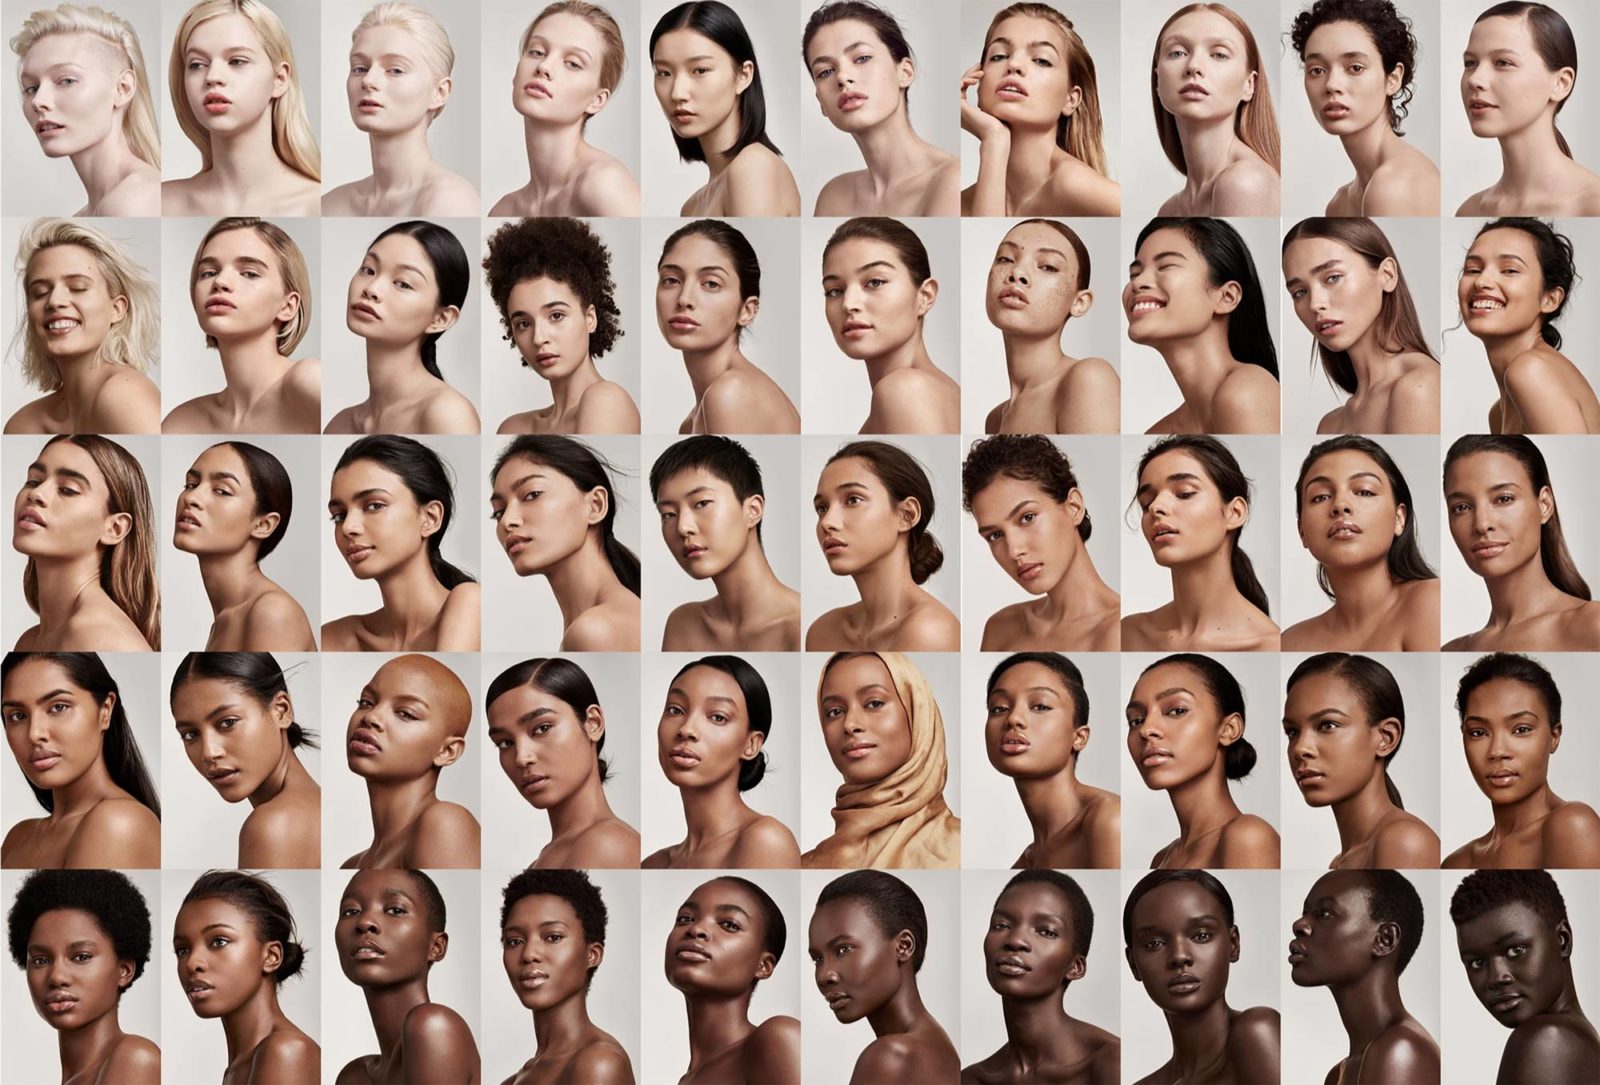 Fenty Built A Wildly Inclusive Beauty Brand Without Ever Explicitly Marketing Itself As